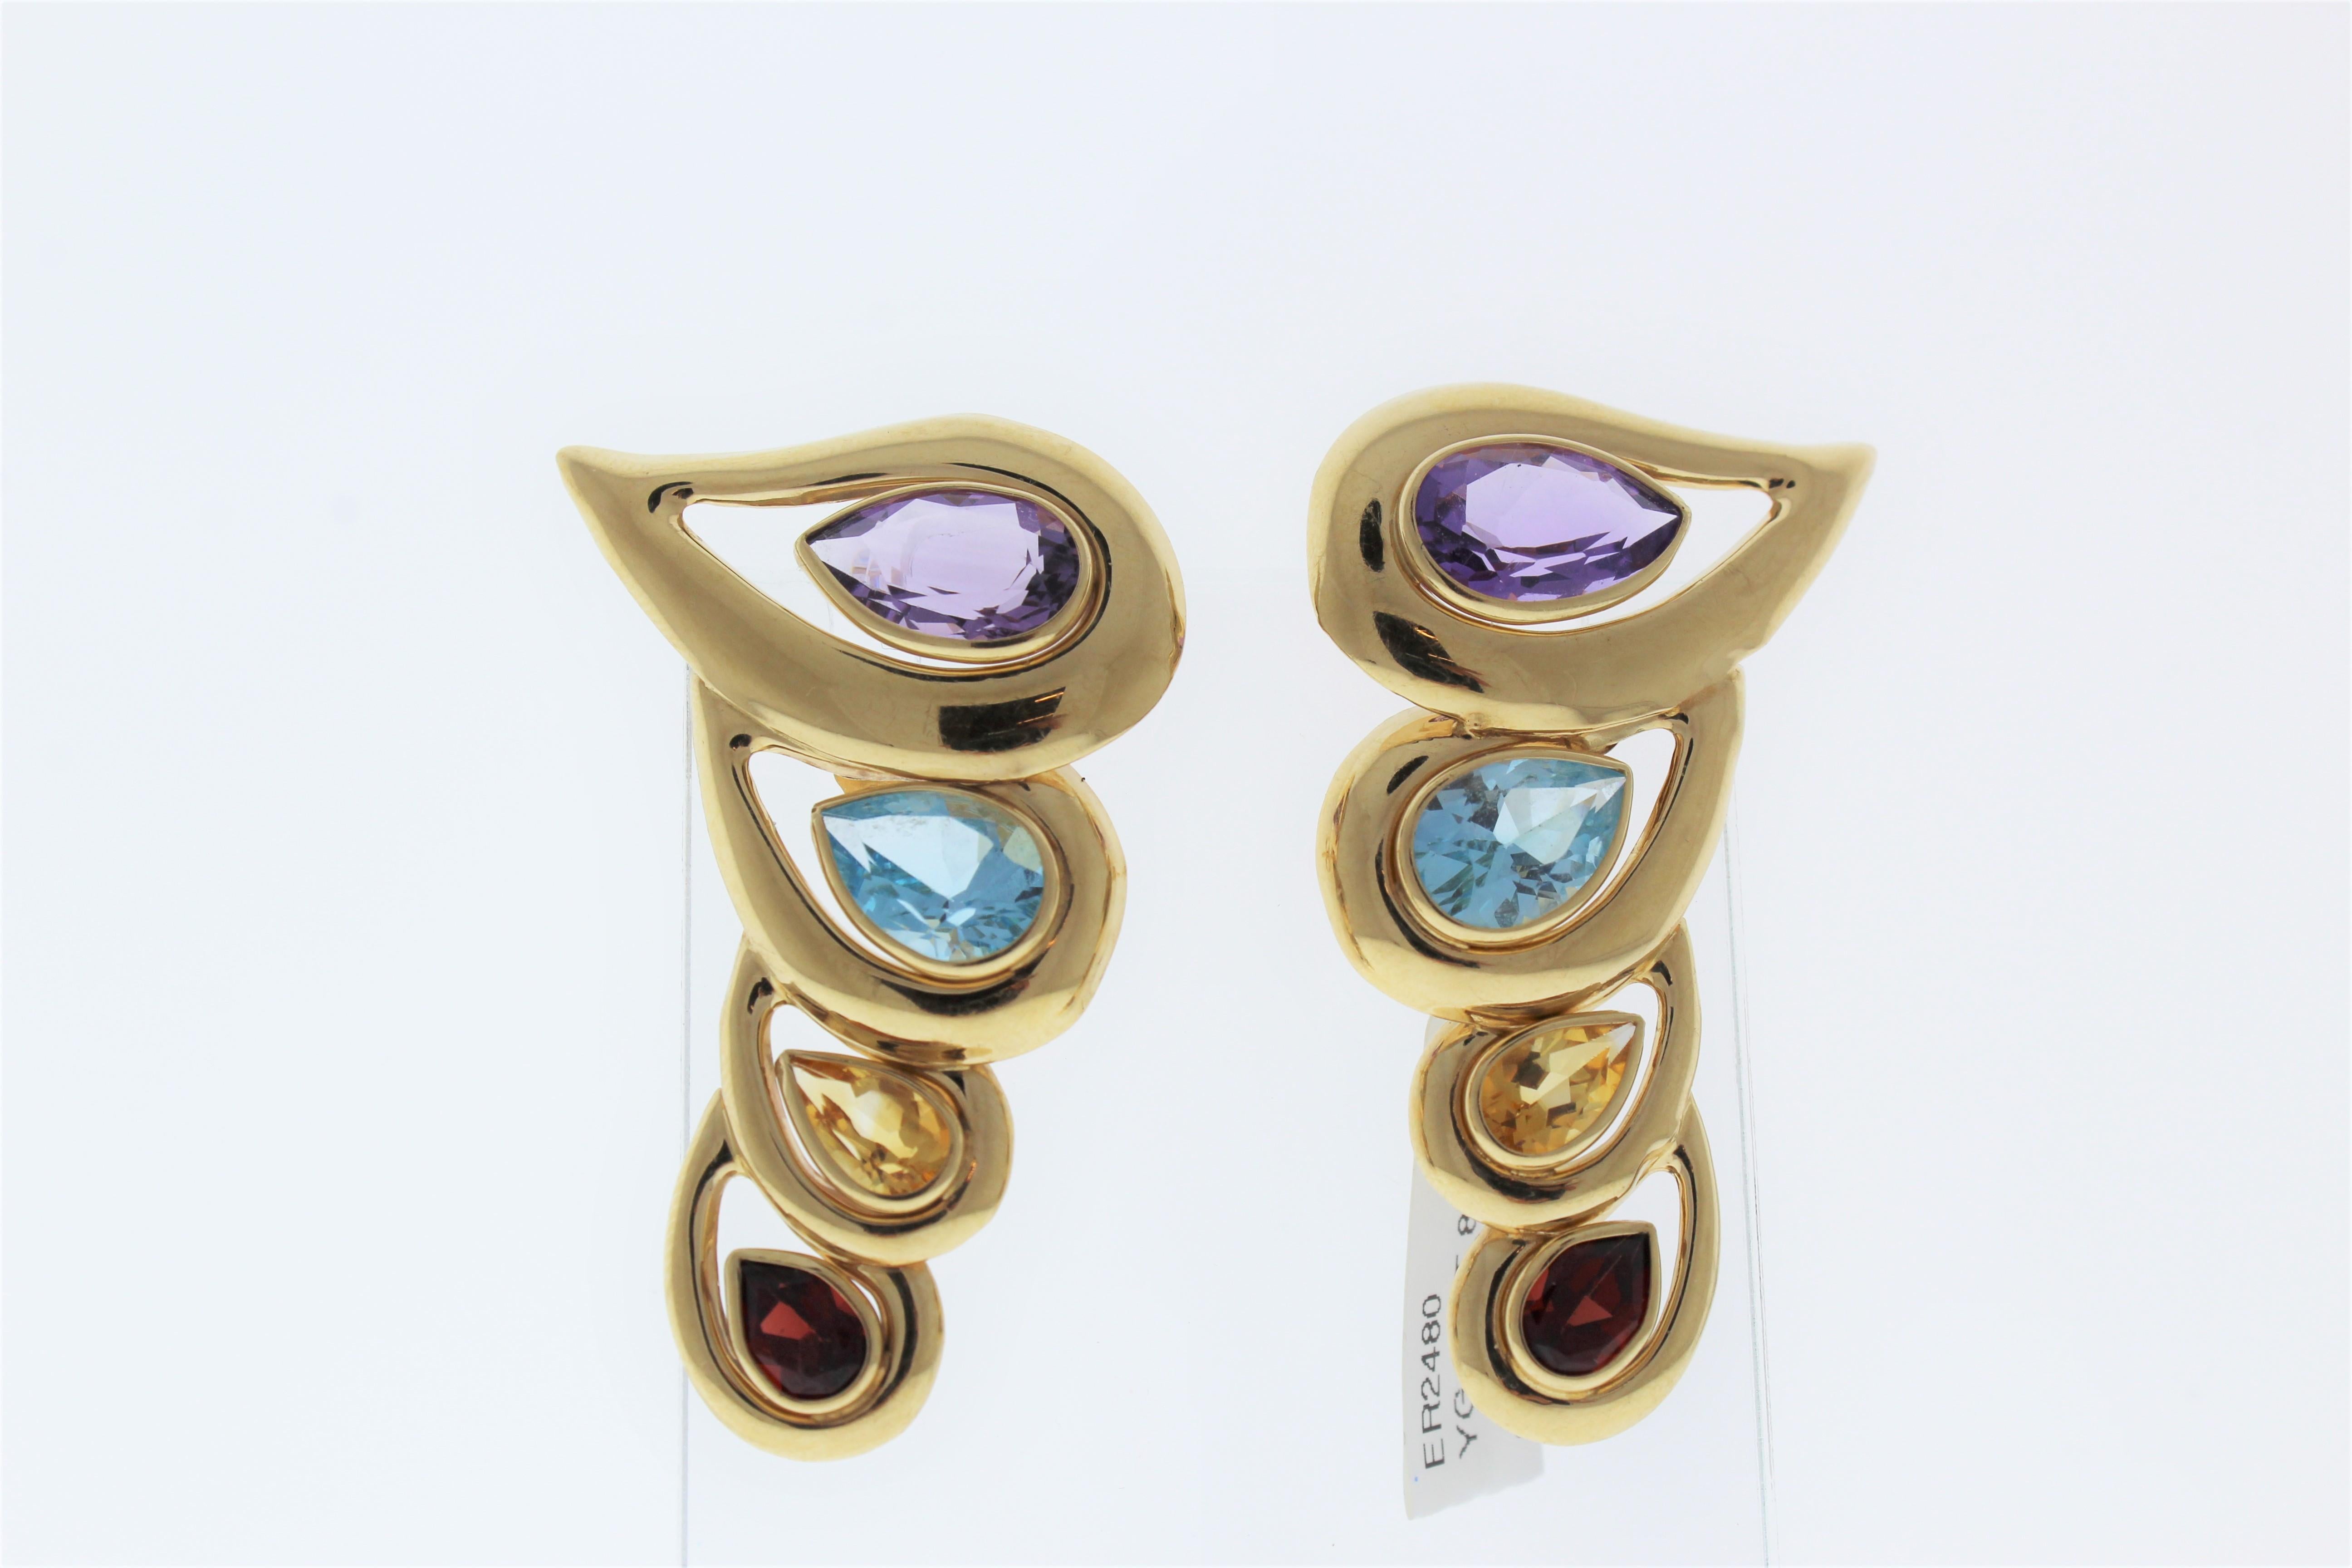 These semi precious gemstones total up to 10 carats and are set in 14k Yellow Gold.